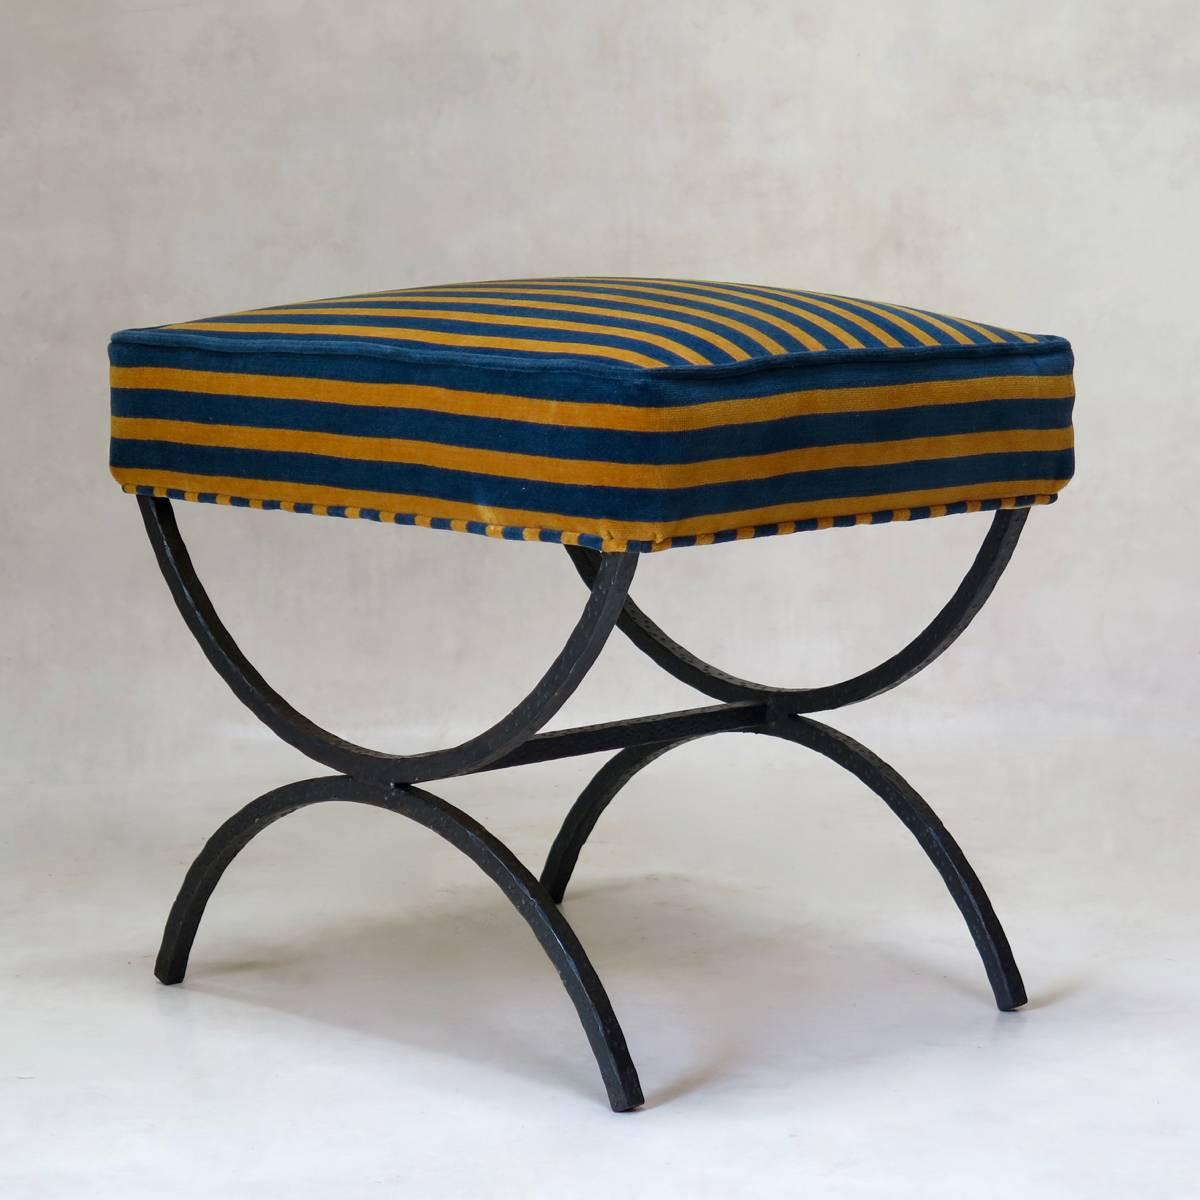 Elegant set of five hammered iron Curule stools, the seats upholstered in blue and yellow velvet. Four of the stools have a black finish, and the fifth one has a gold finish with orange primer visible beneath.